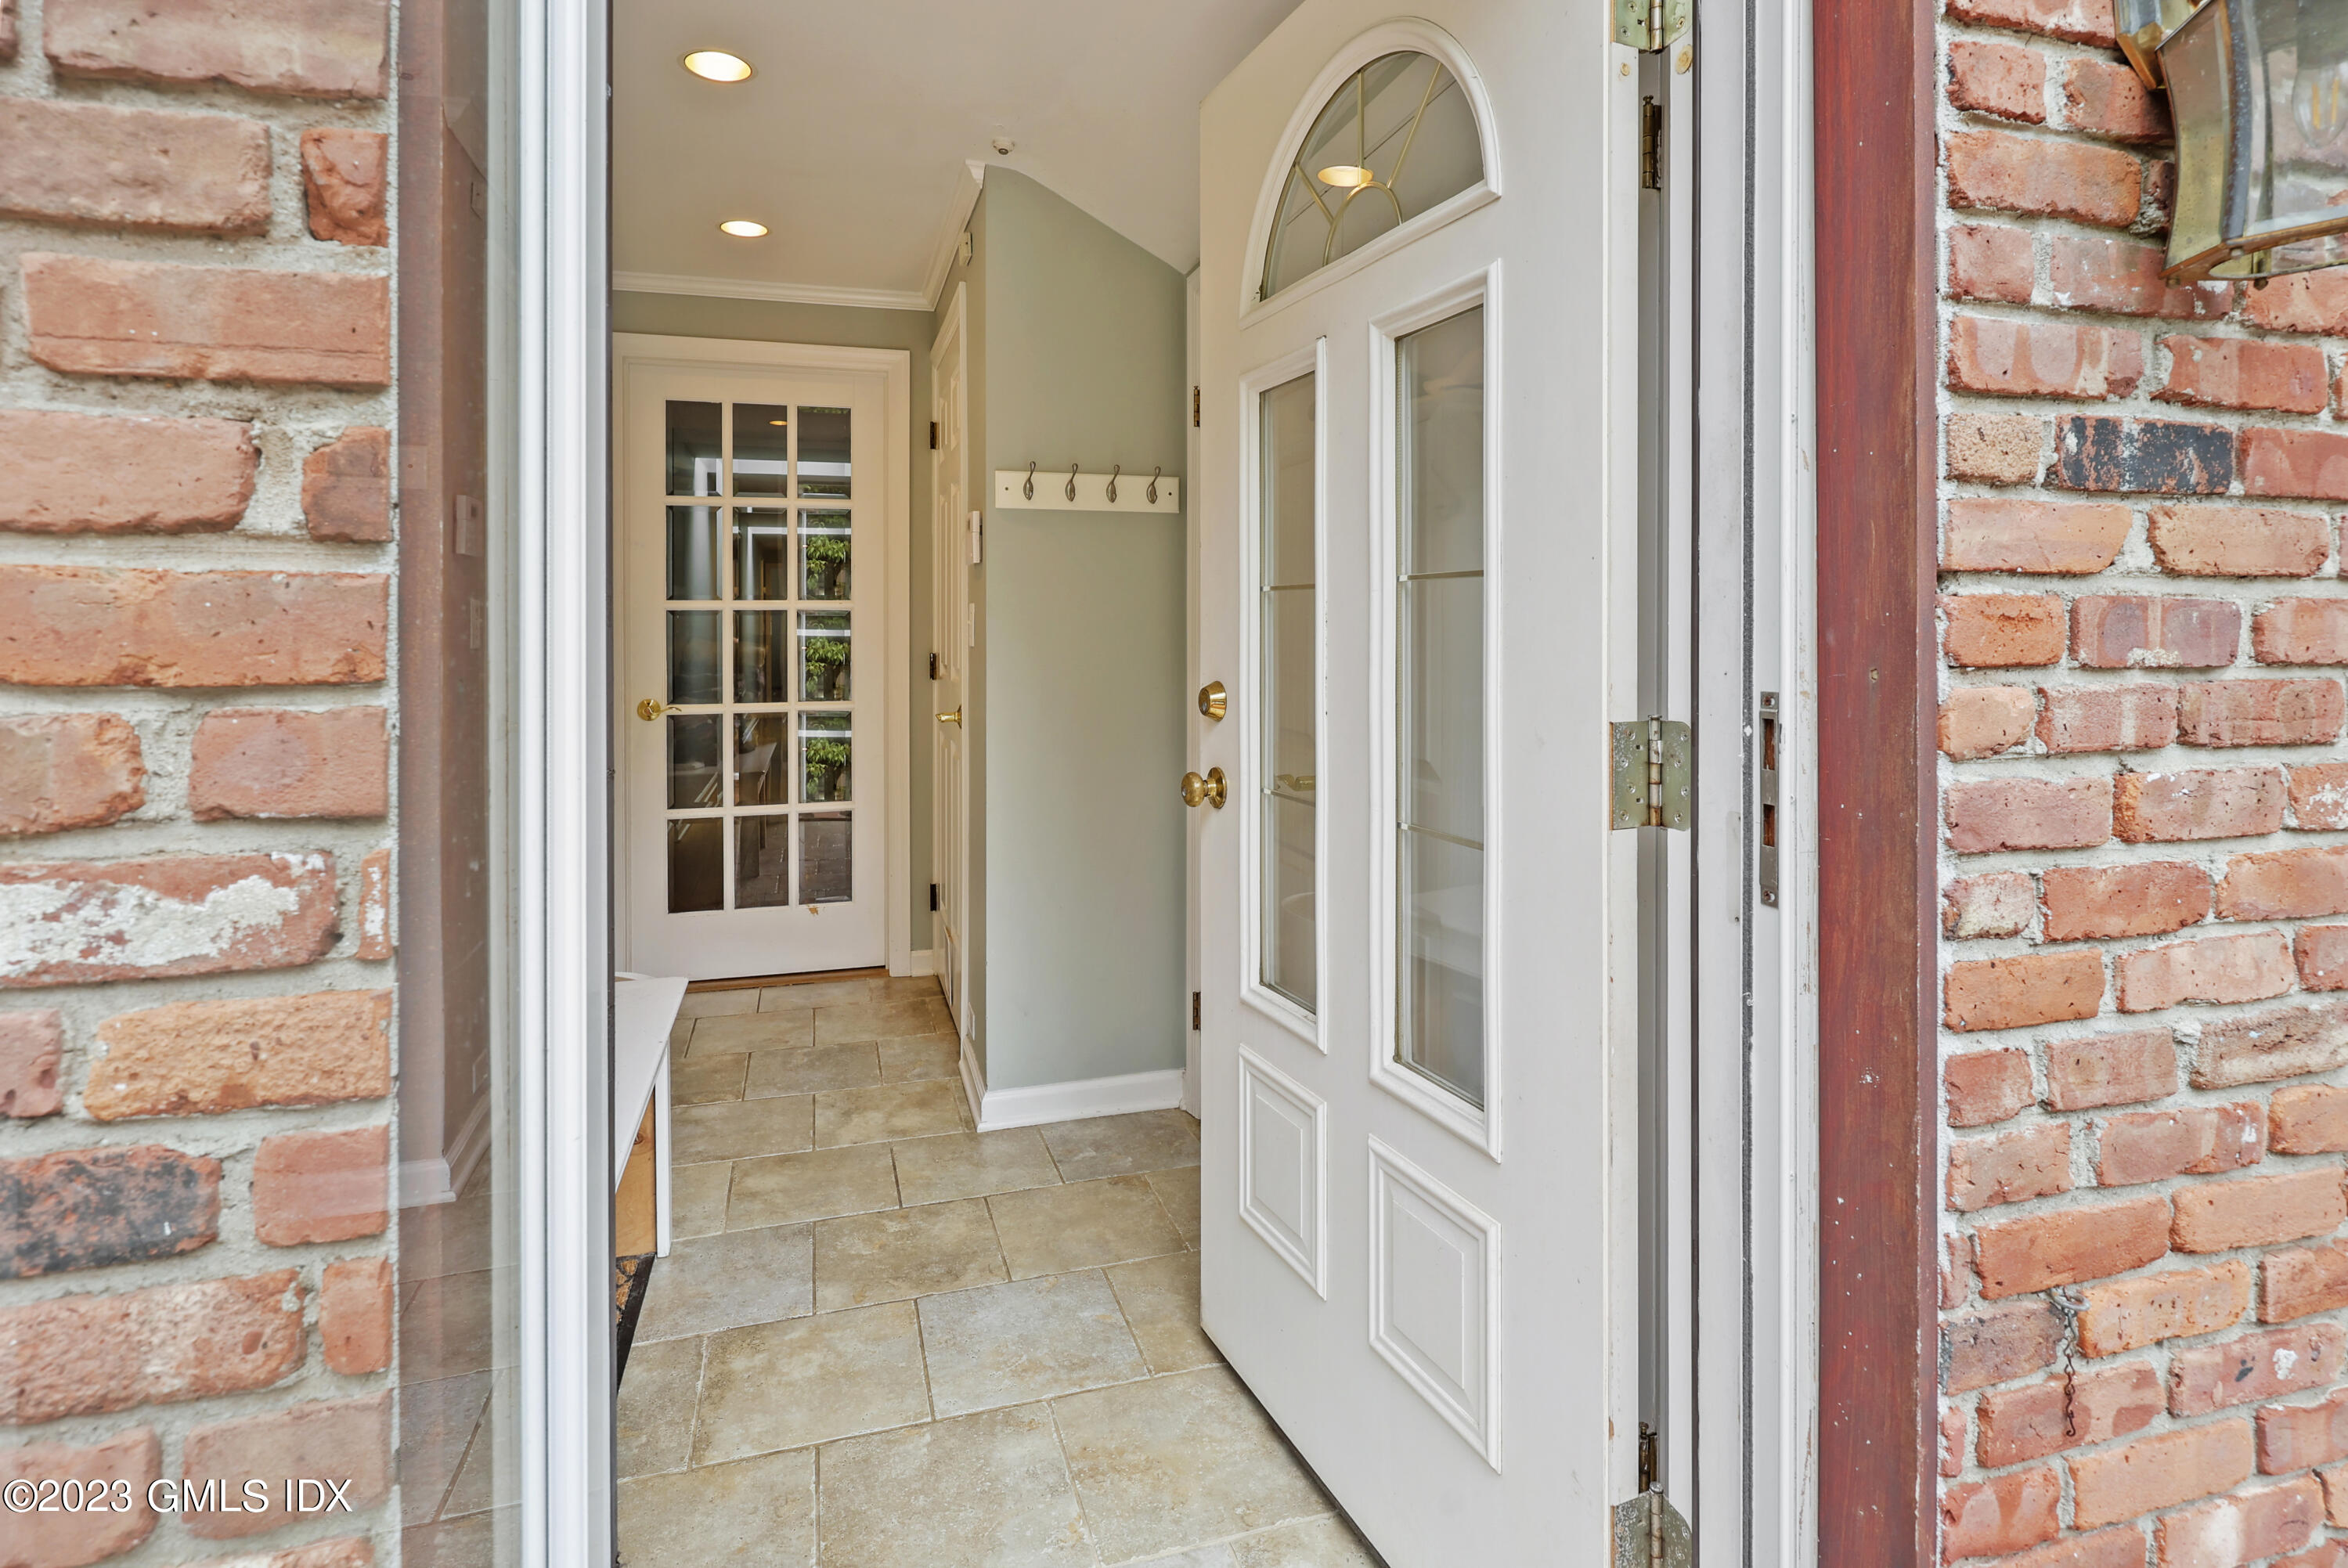 a view of a hallway with windows and entryway